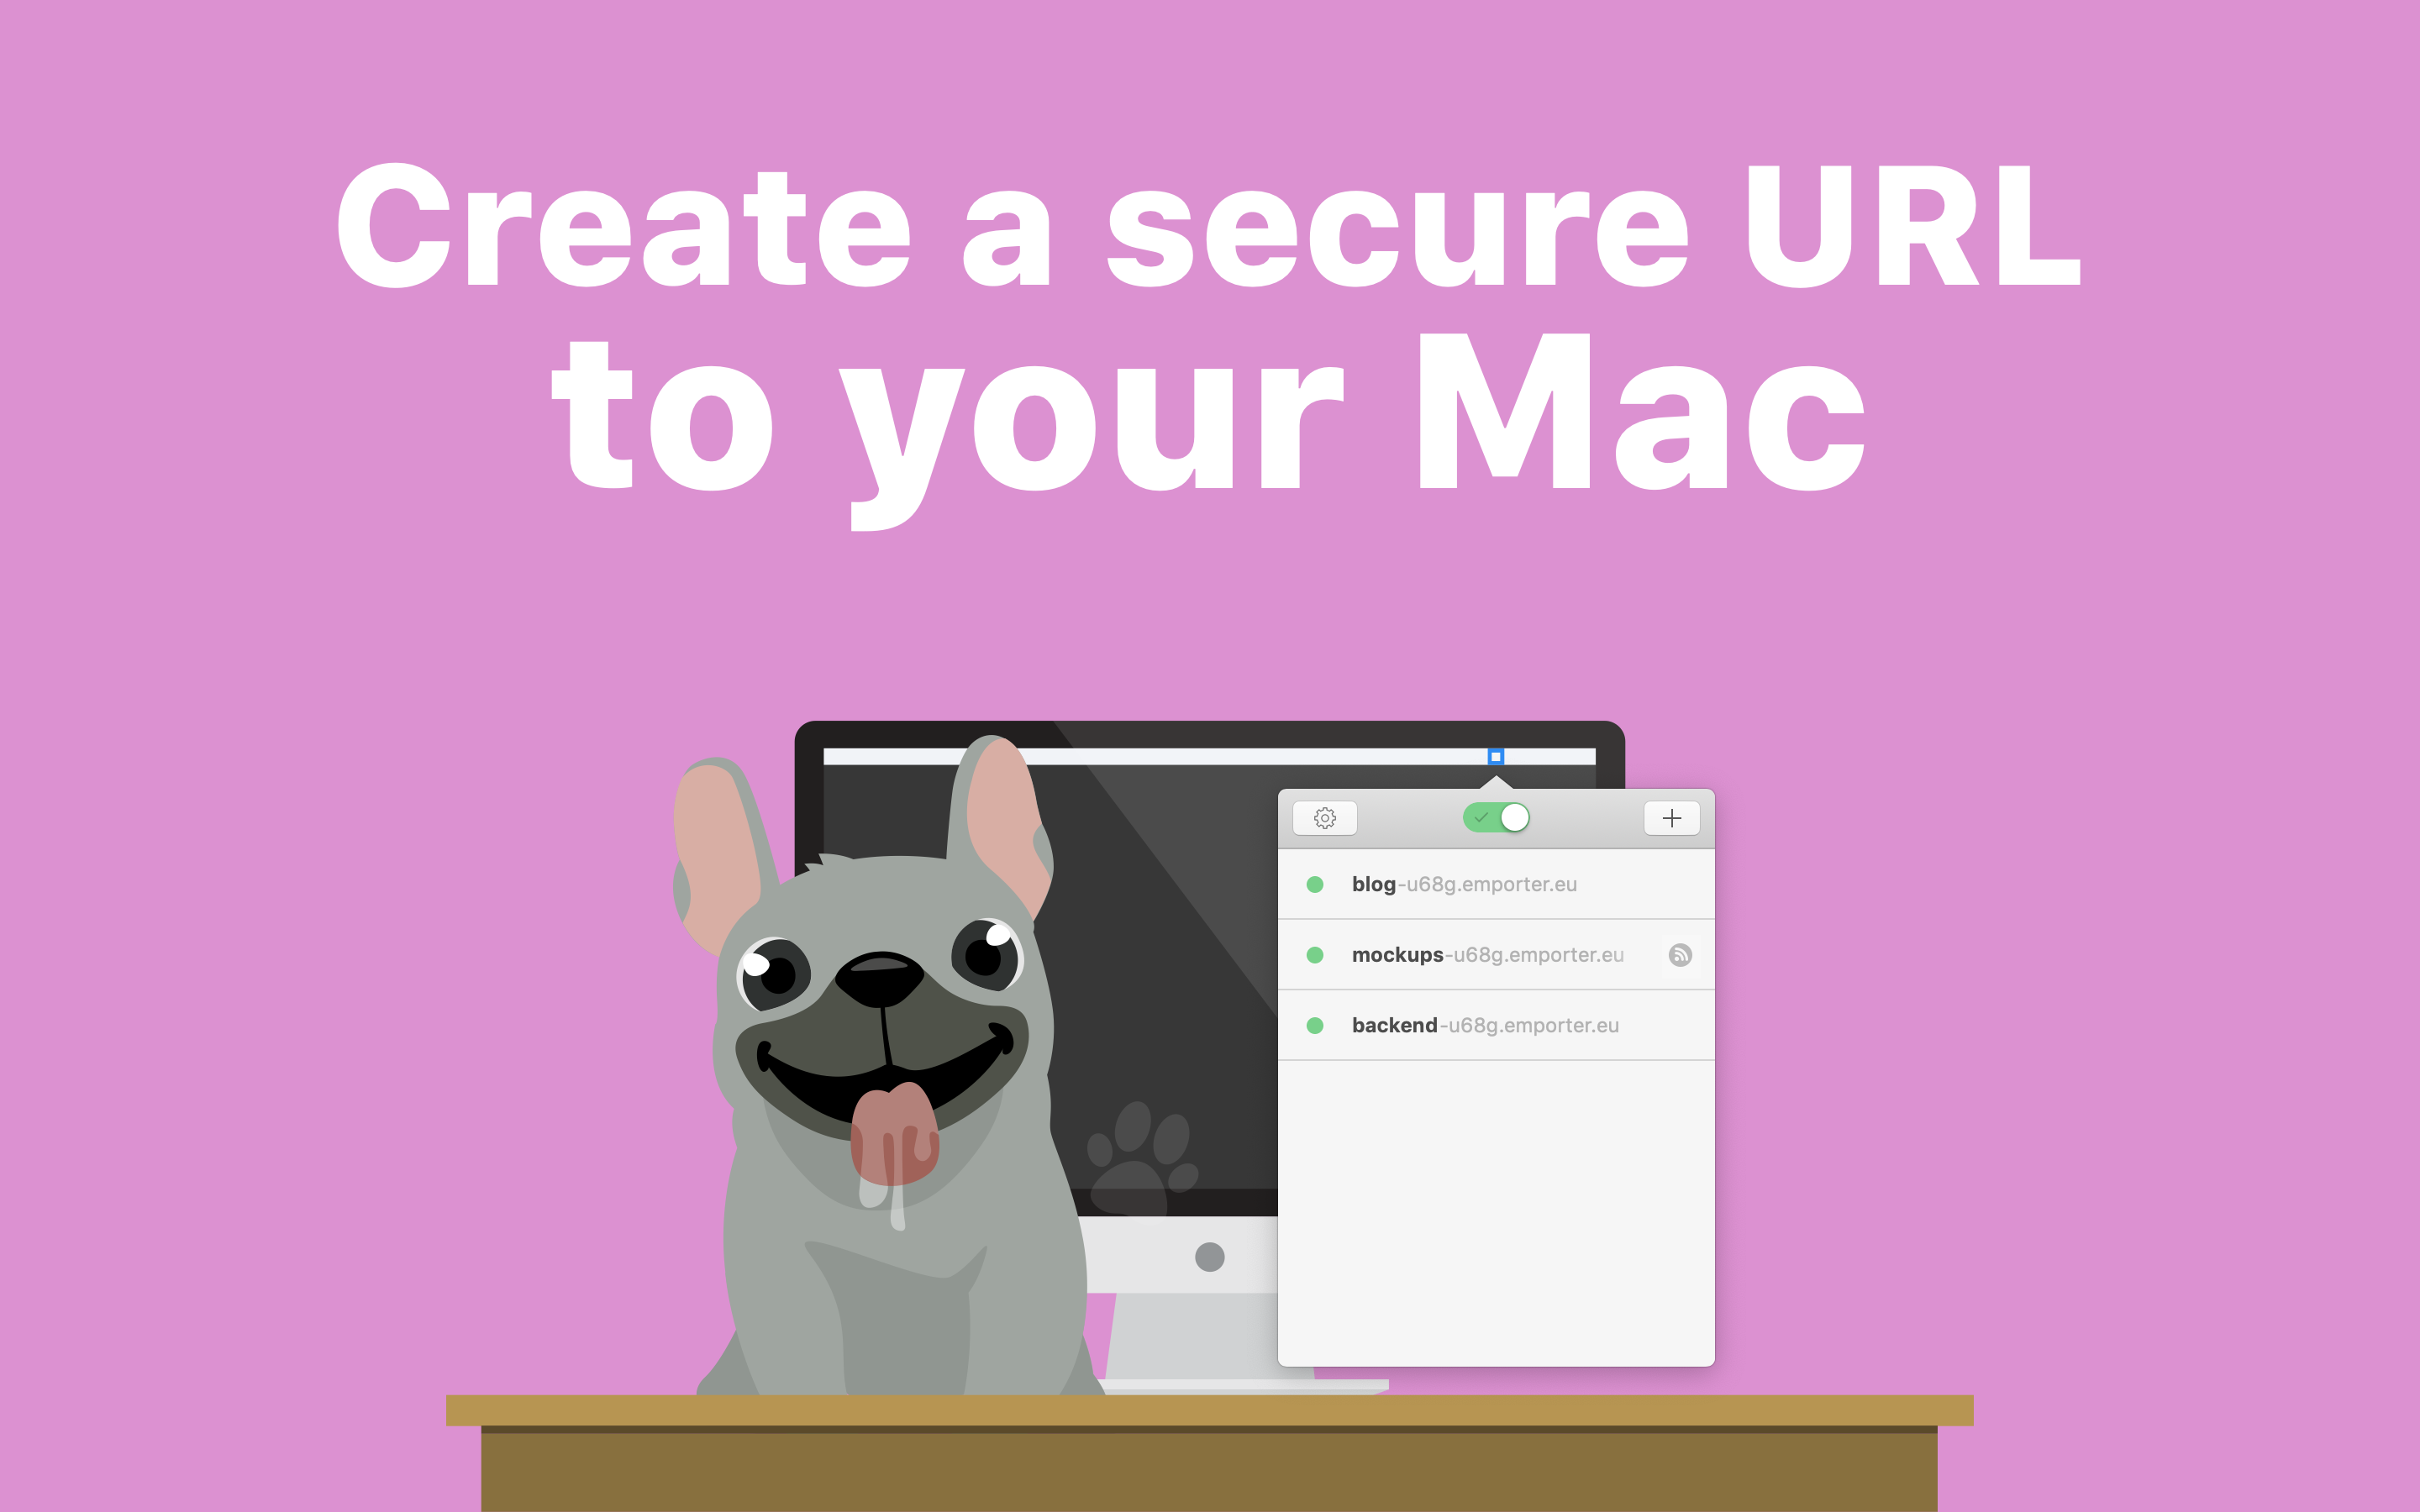 Create a secure URL to your Mac